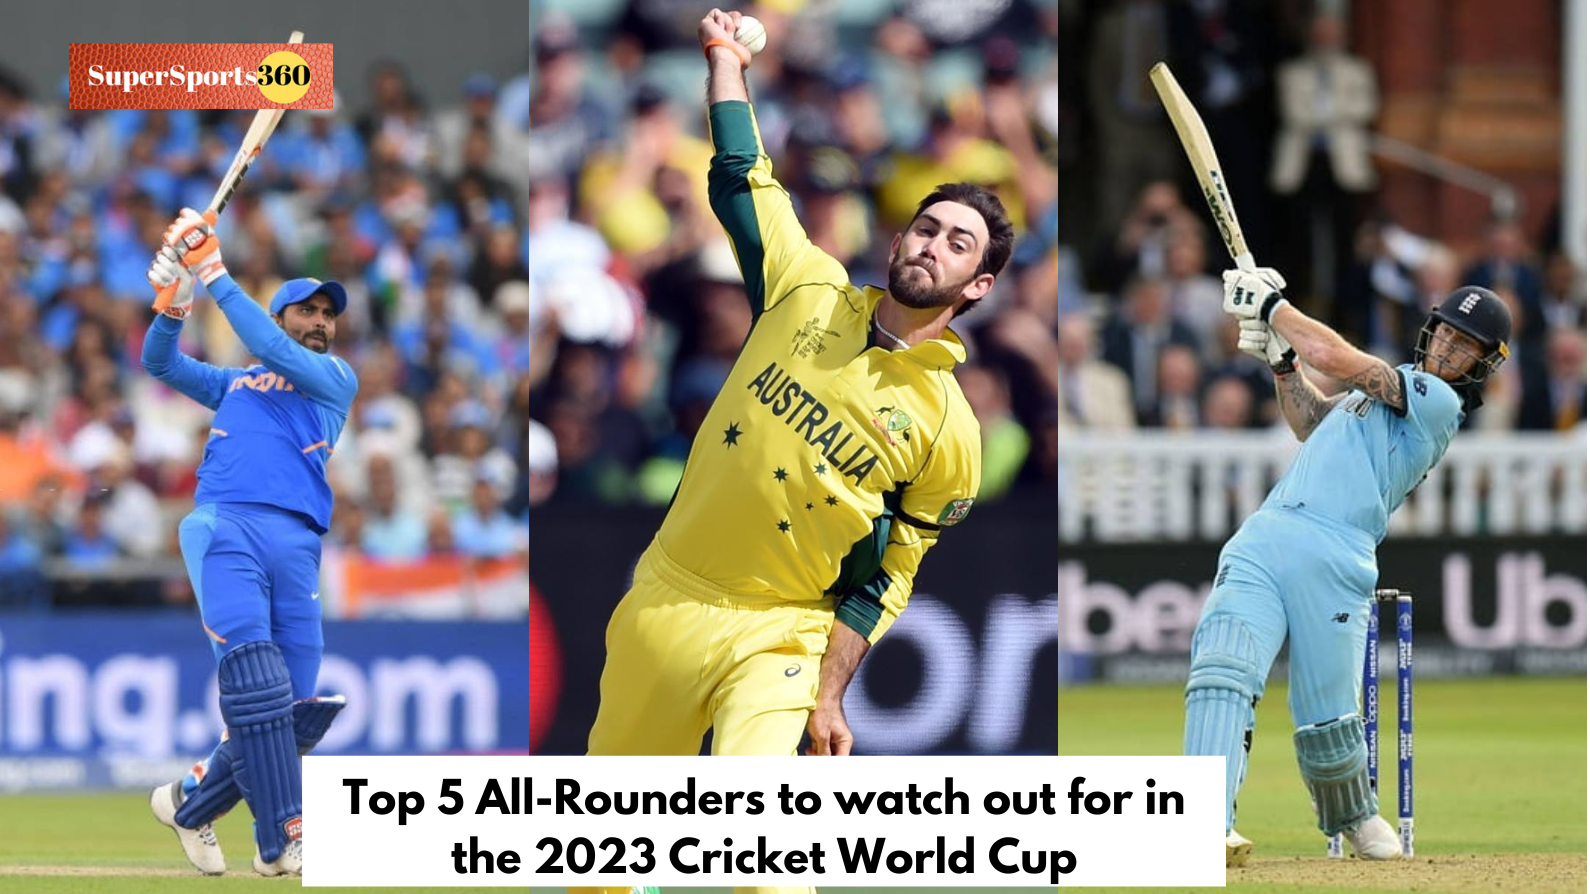 Top 5 All-Rounders to watch out for in the 2023 Cricket World Cup